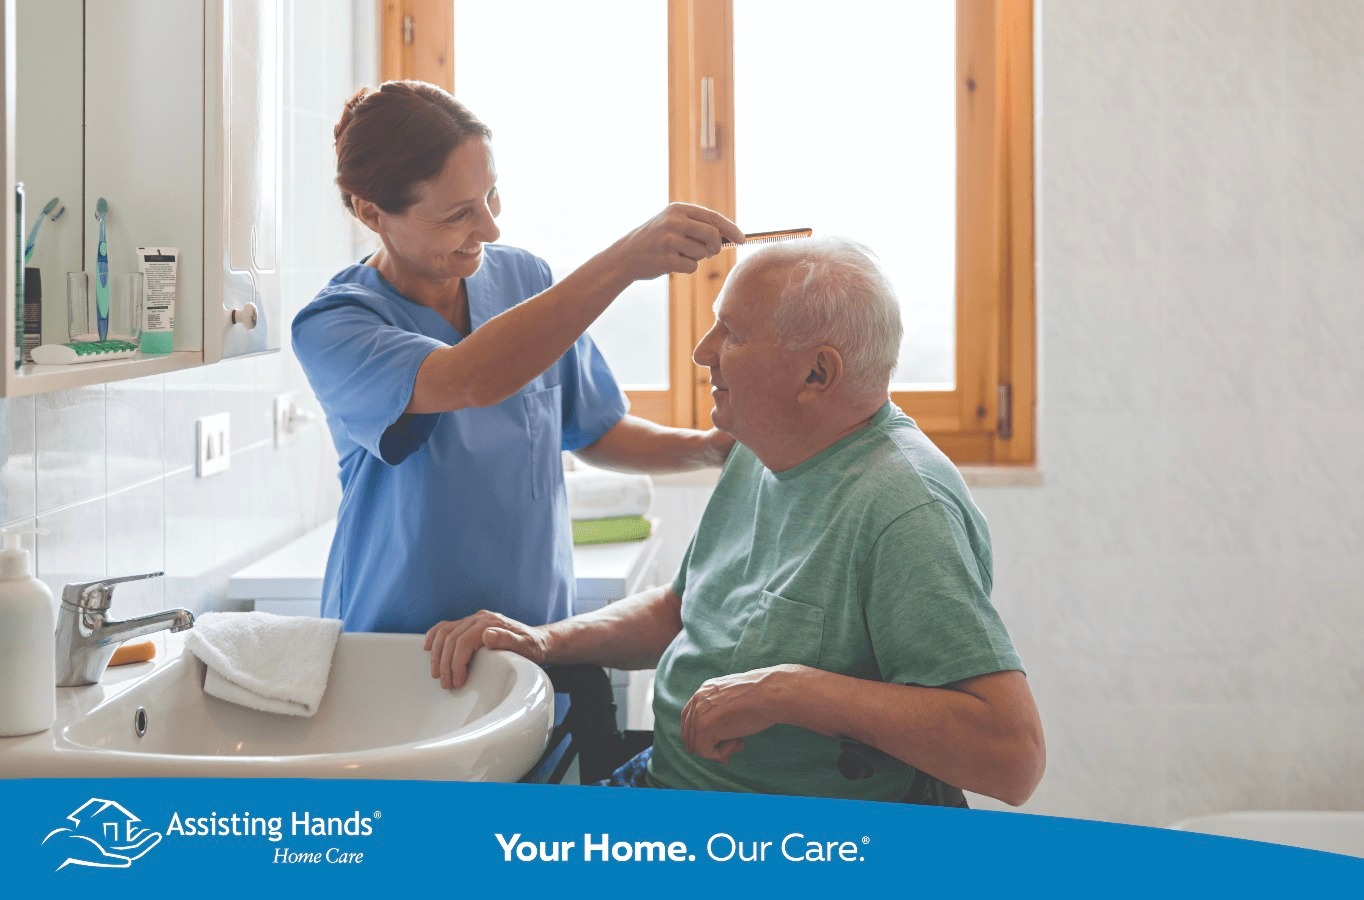 24 hour care - Assisting Hands Home Care